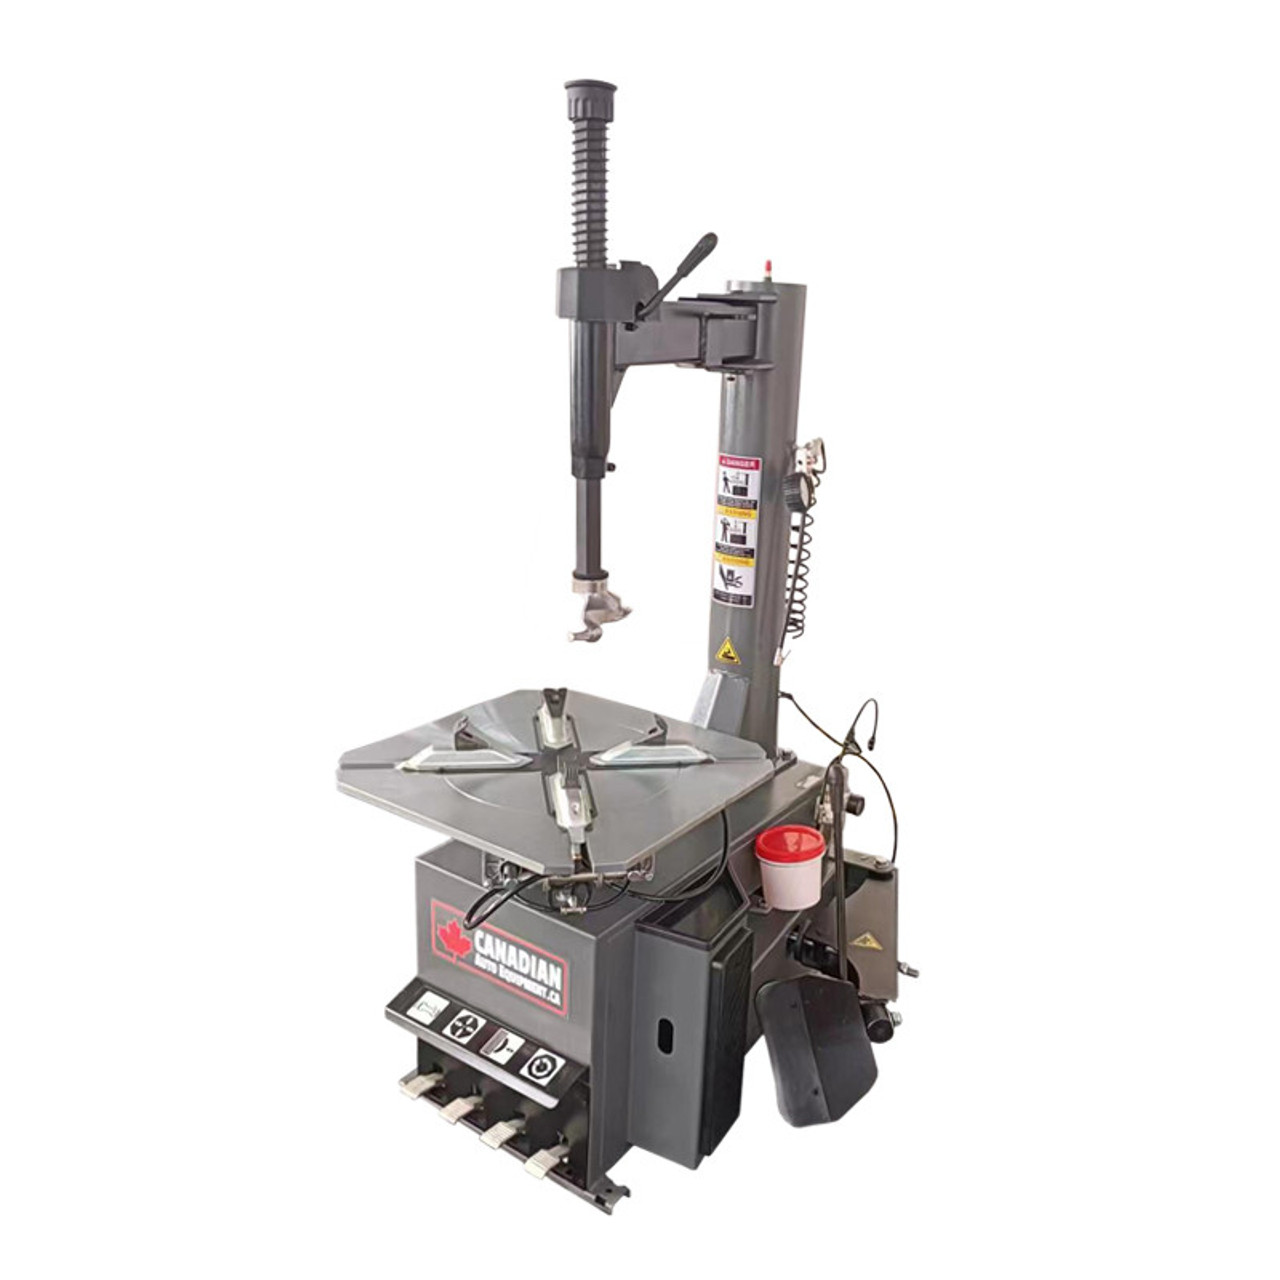 CAE-2725EZ Tire Changer with Manual Lock Lever & Right Hand Assist & CAE-3224 2D Wheel Balancer with Automatic Entry